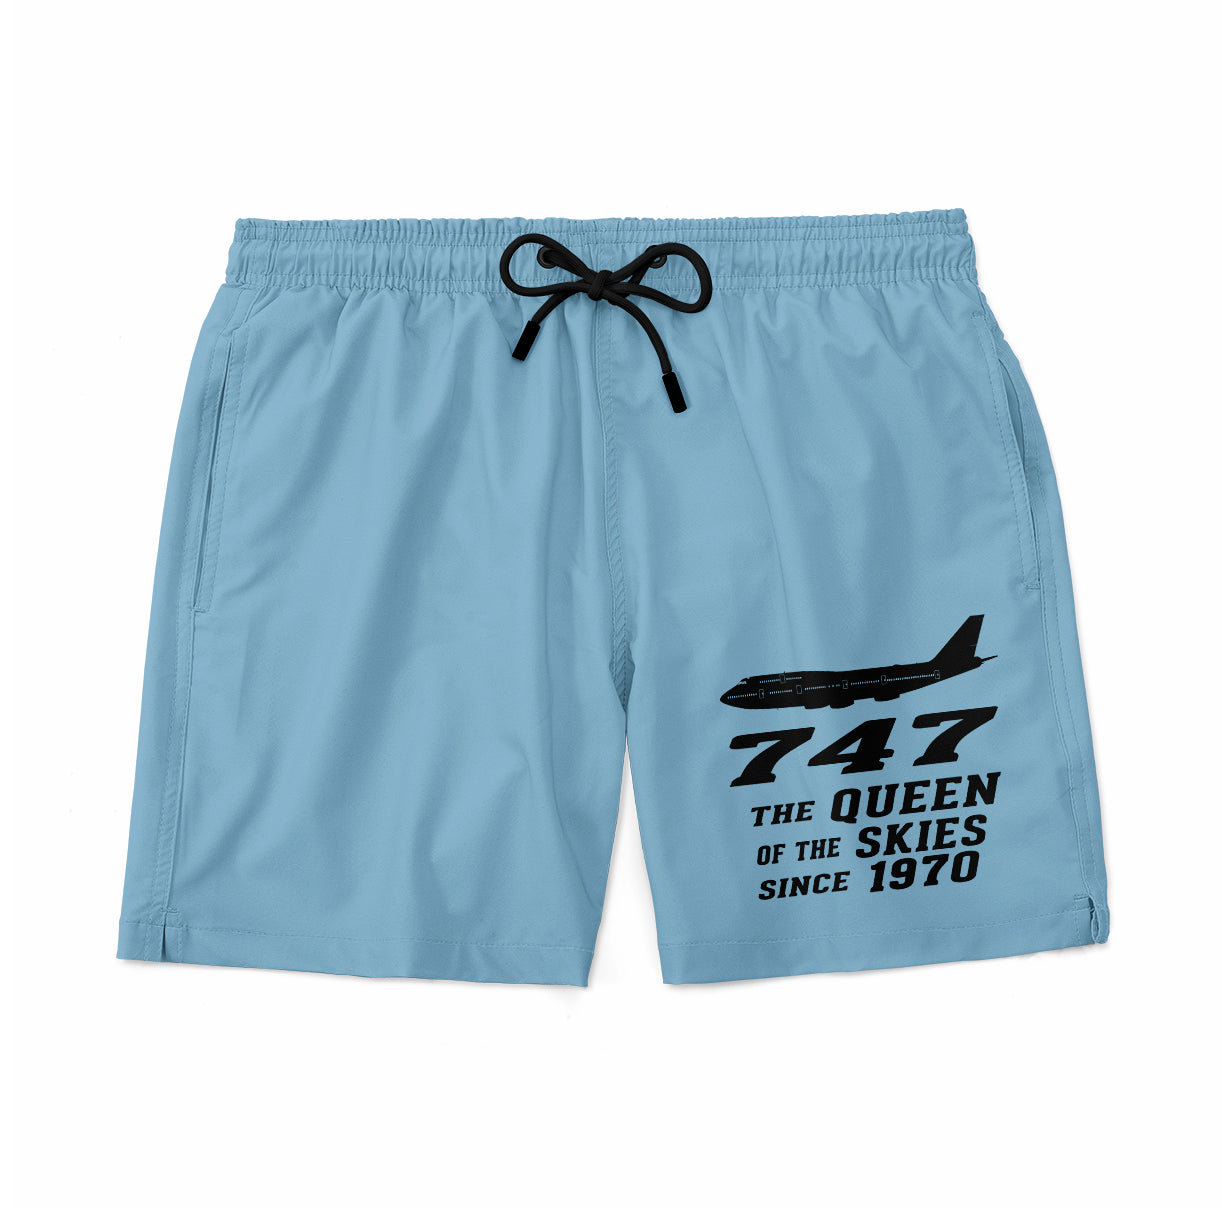 Boeing 747 - Queen of the Skies (2) Designed Swim Trunks & Shorts